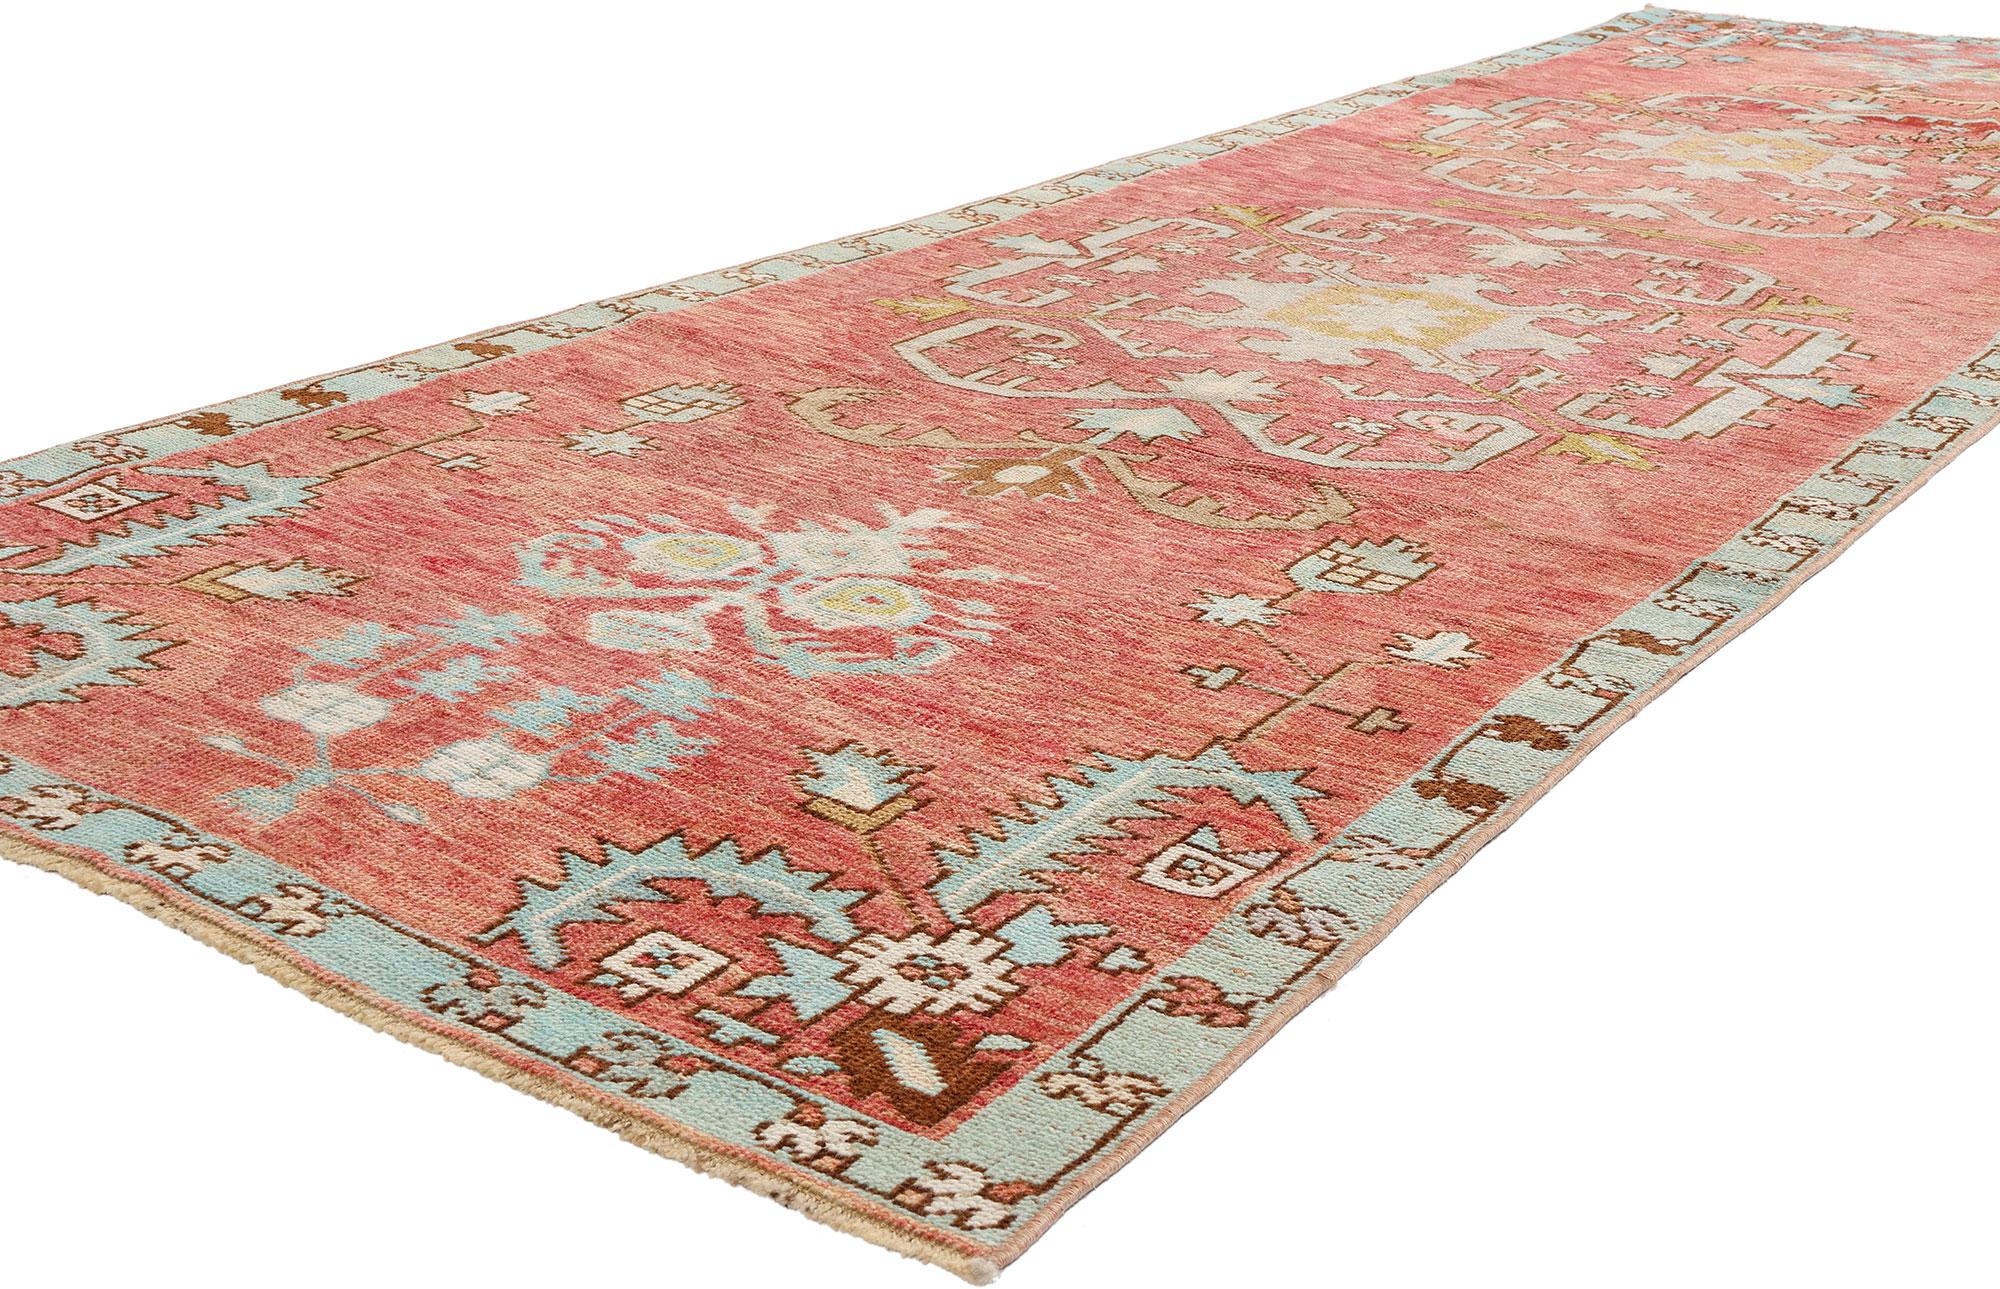 53921 Vintage Red Turkish Oushak Rug Runner, 03'07 x 11'05. Turkish Oushak carpet runners, originating from the Oushak region in western Turkey, are renowned for their intricate designs featuring expansive geometric patterns and soothing color